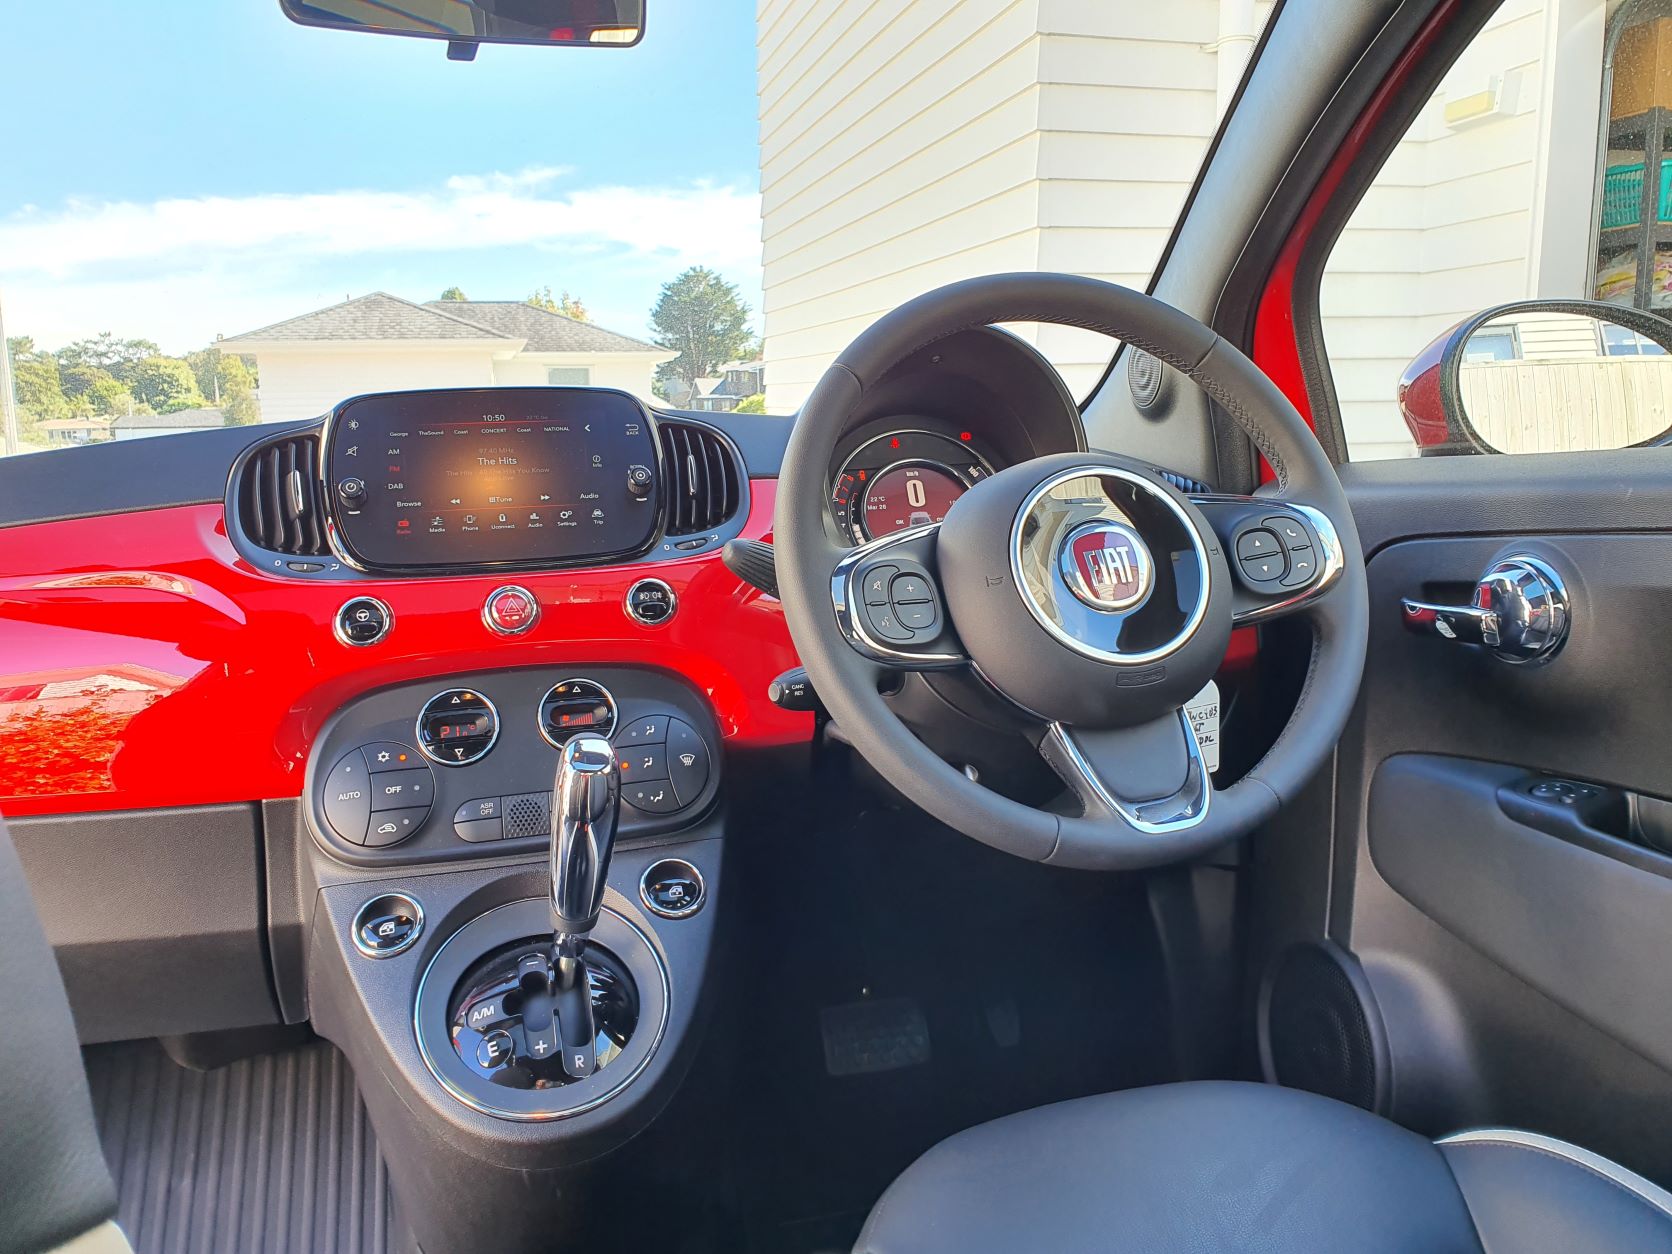 A view of the dashboard on the new Fiat 500 Dolcevita